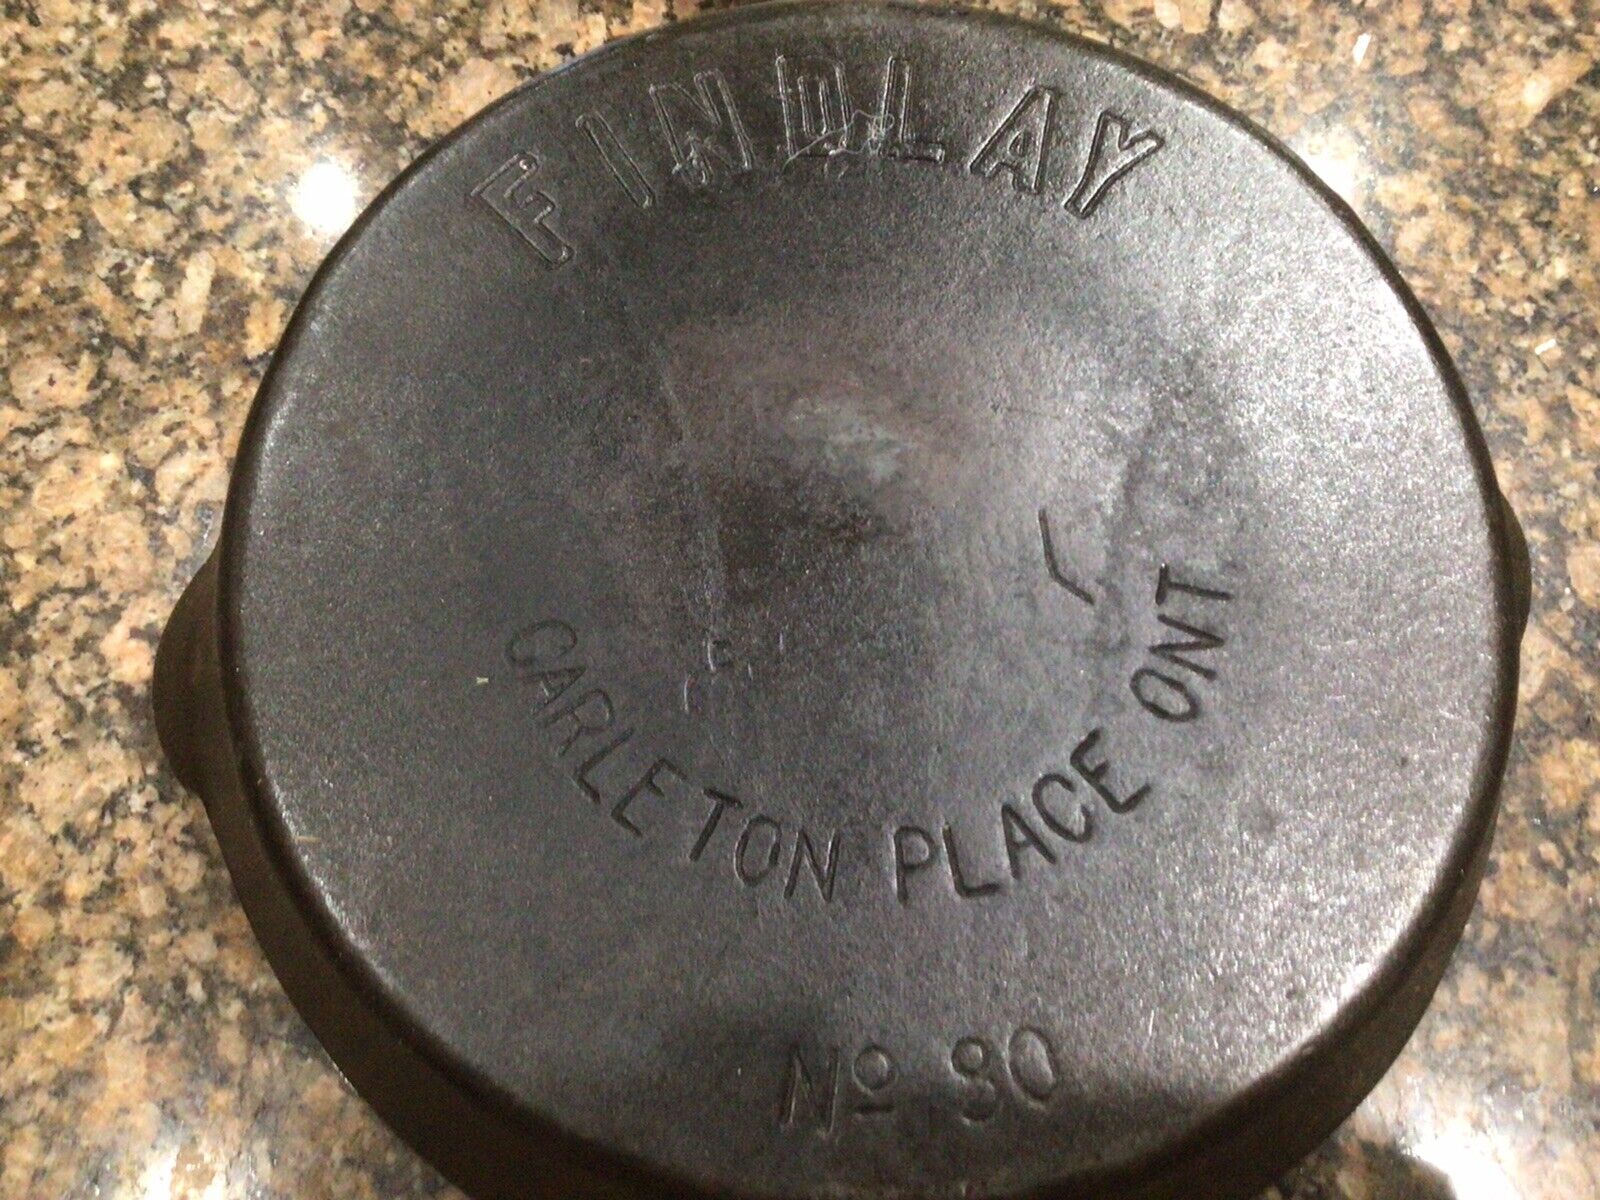 rare vintage Findlay cast iron skillet no. 80 Carleton Place, Ontario cleaned